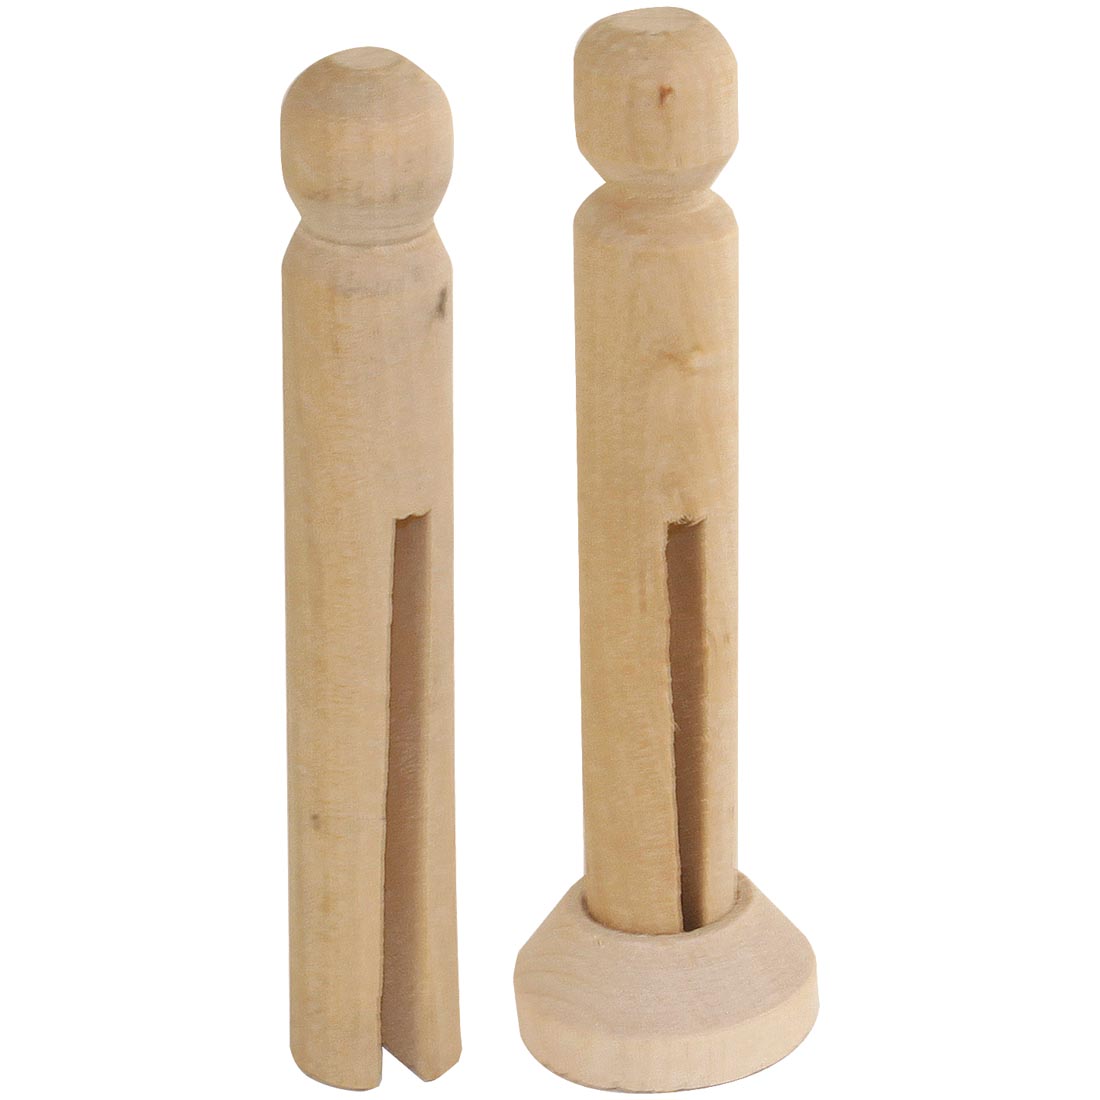 Creativity street natural wooden doll pins and stands